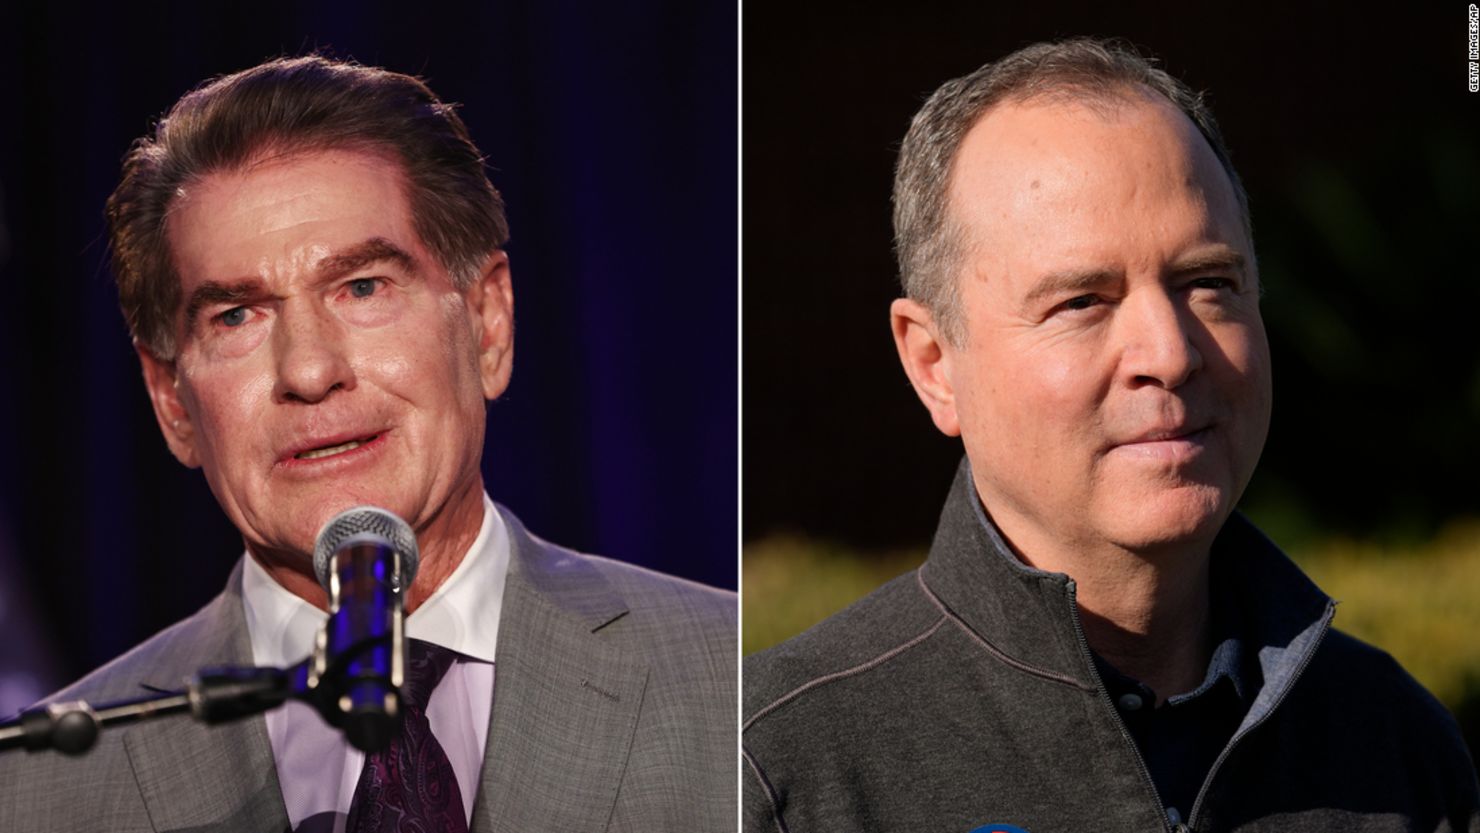 Former MLB star and Republican Steve Garvey (left) and Democrat US Rep. Adam Schiff (right) emerged victorious in California's top-two primary system.